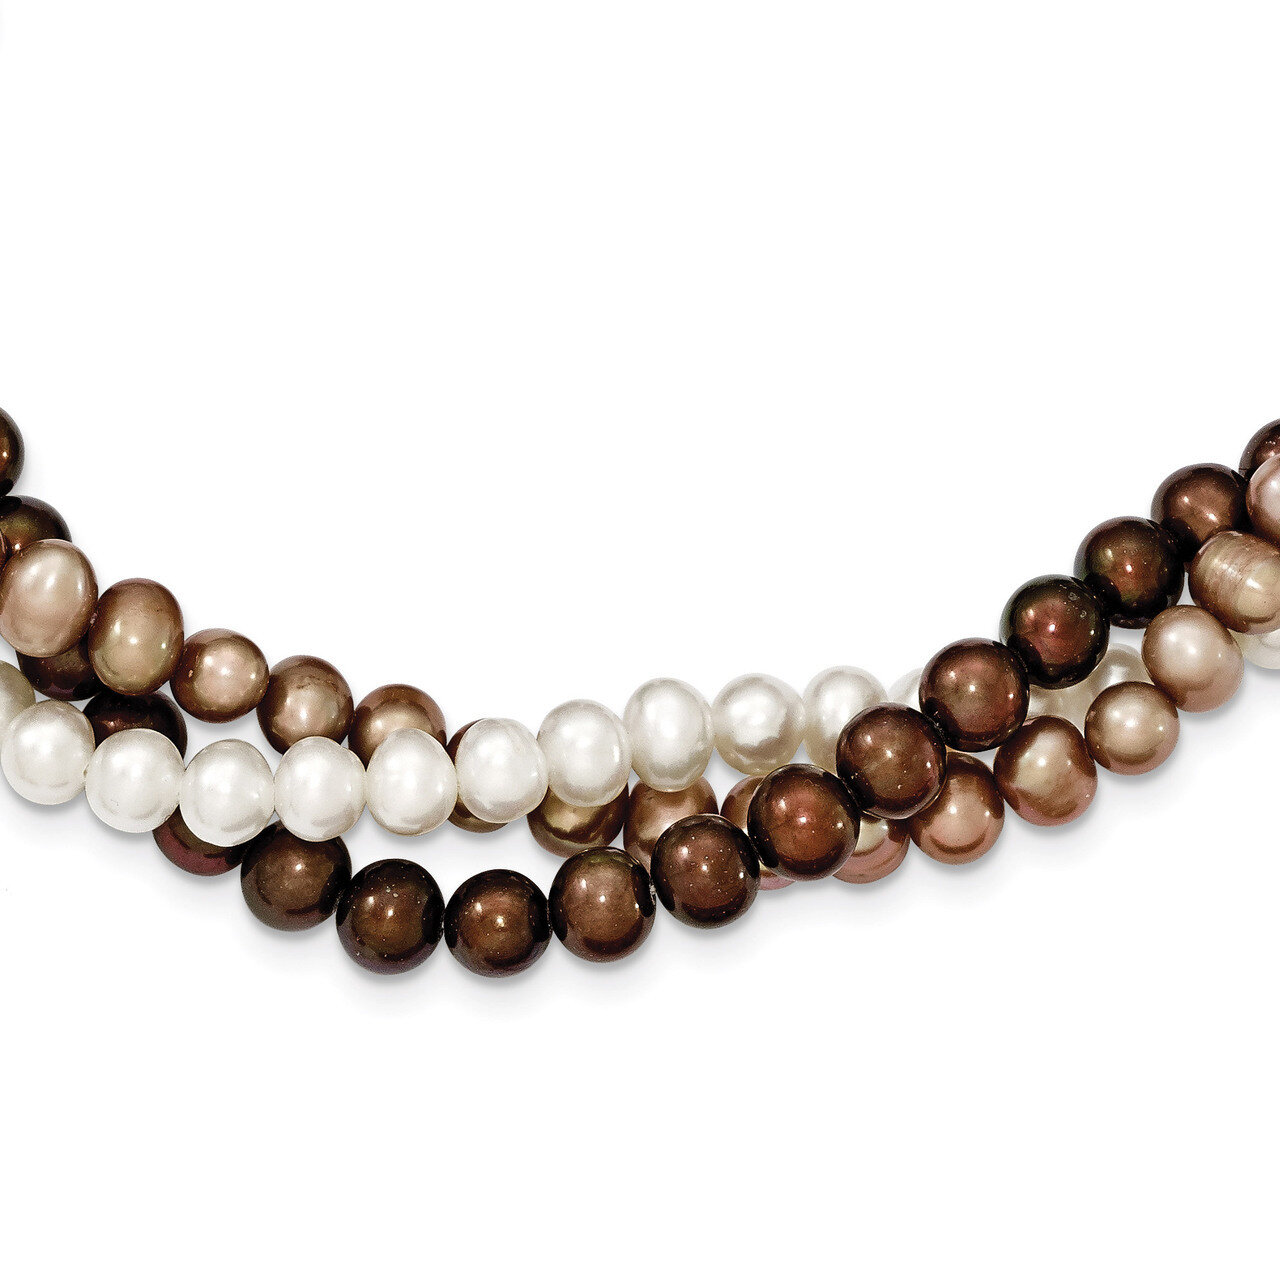 5-6mm White, Brown, Beige Cultured Potato Pearl with 2 Inch Extender Necklace Sterling Silver QH4818-17